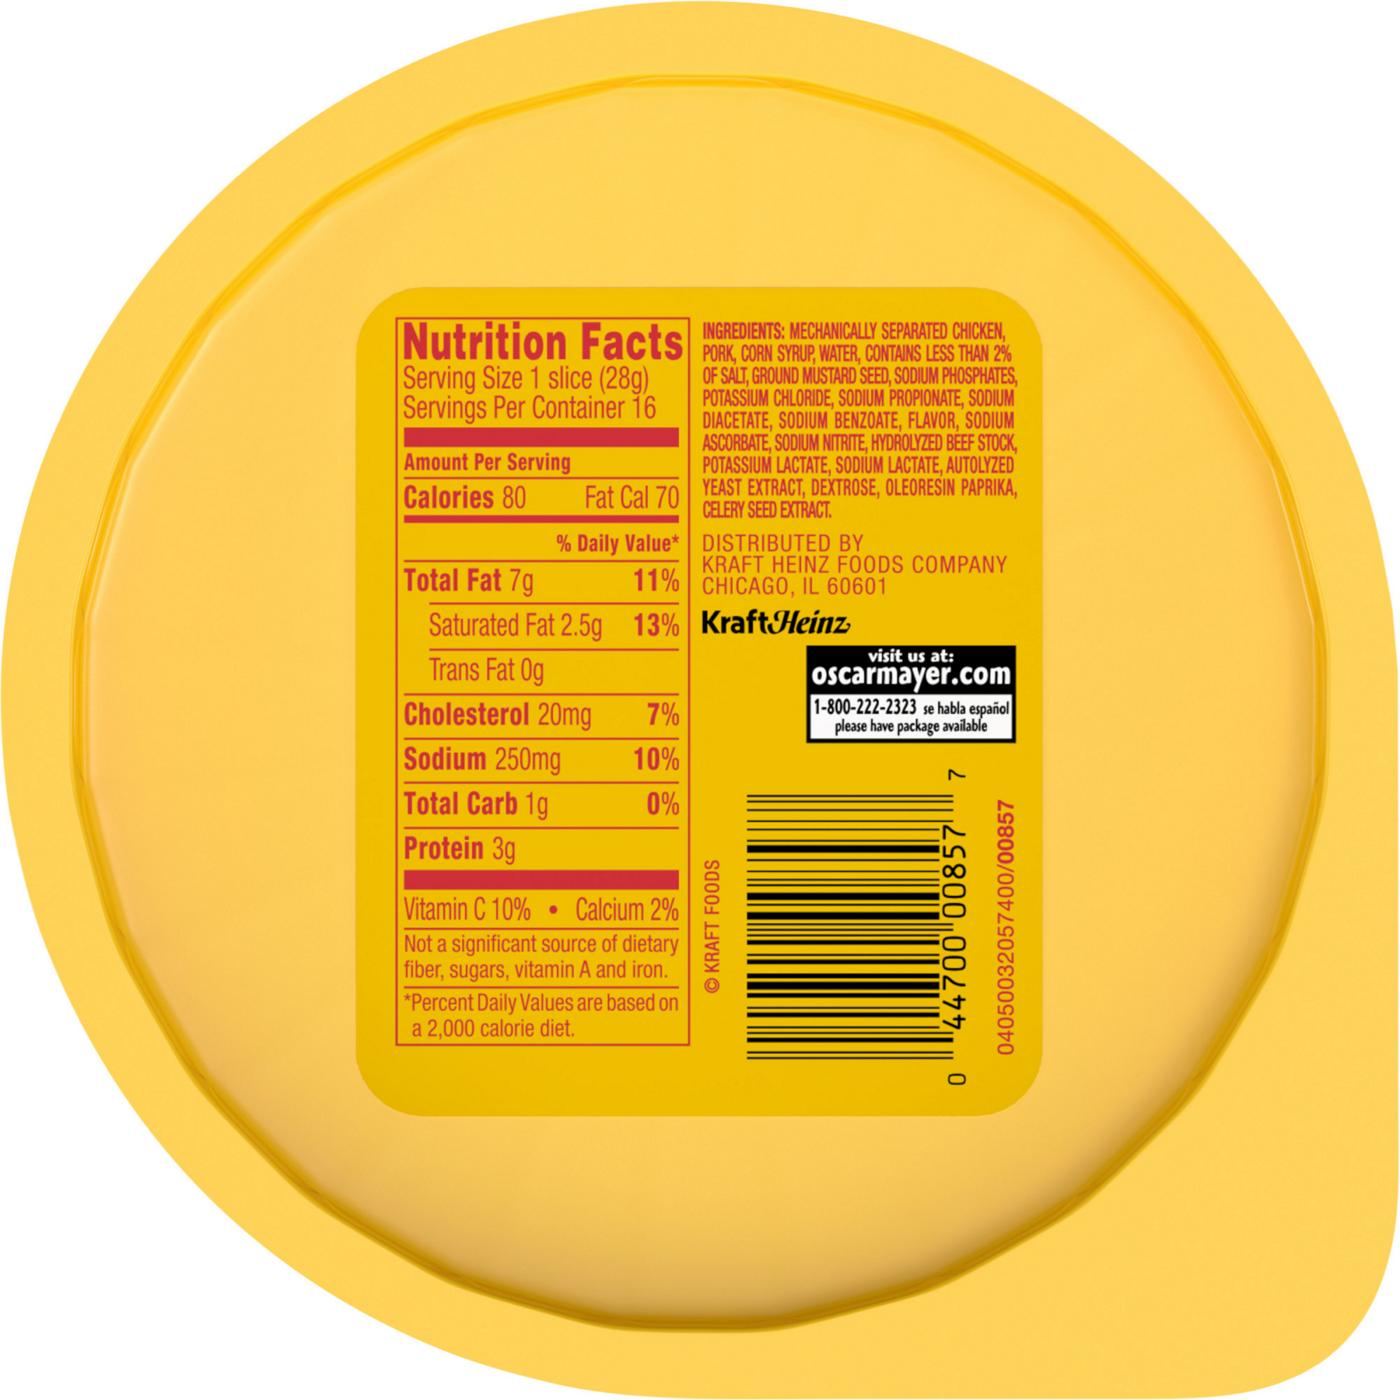 Oscar Mayer Bologna Deli Lunch Meat; image 4 of 6